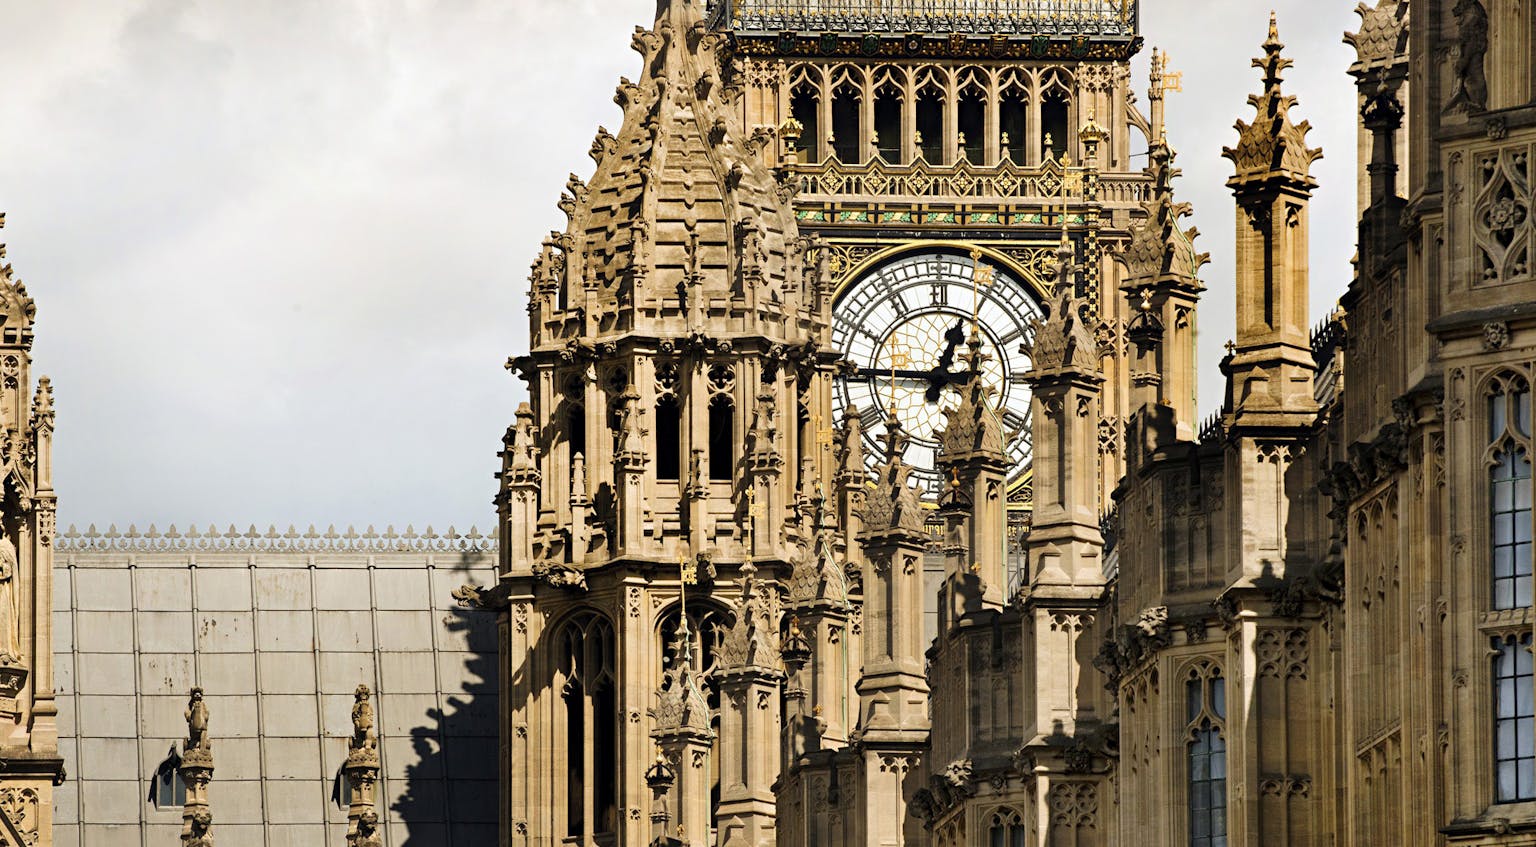 The Palace of Westminster and the Elizabeth Tower